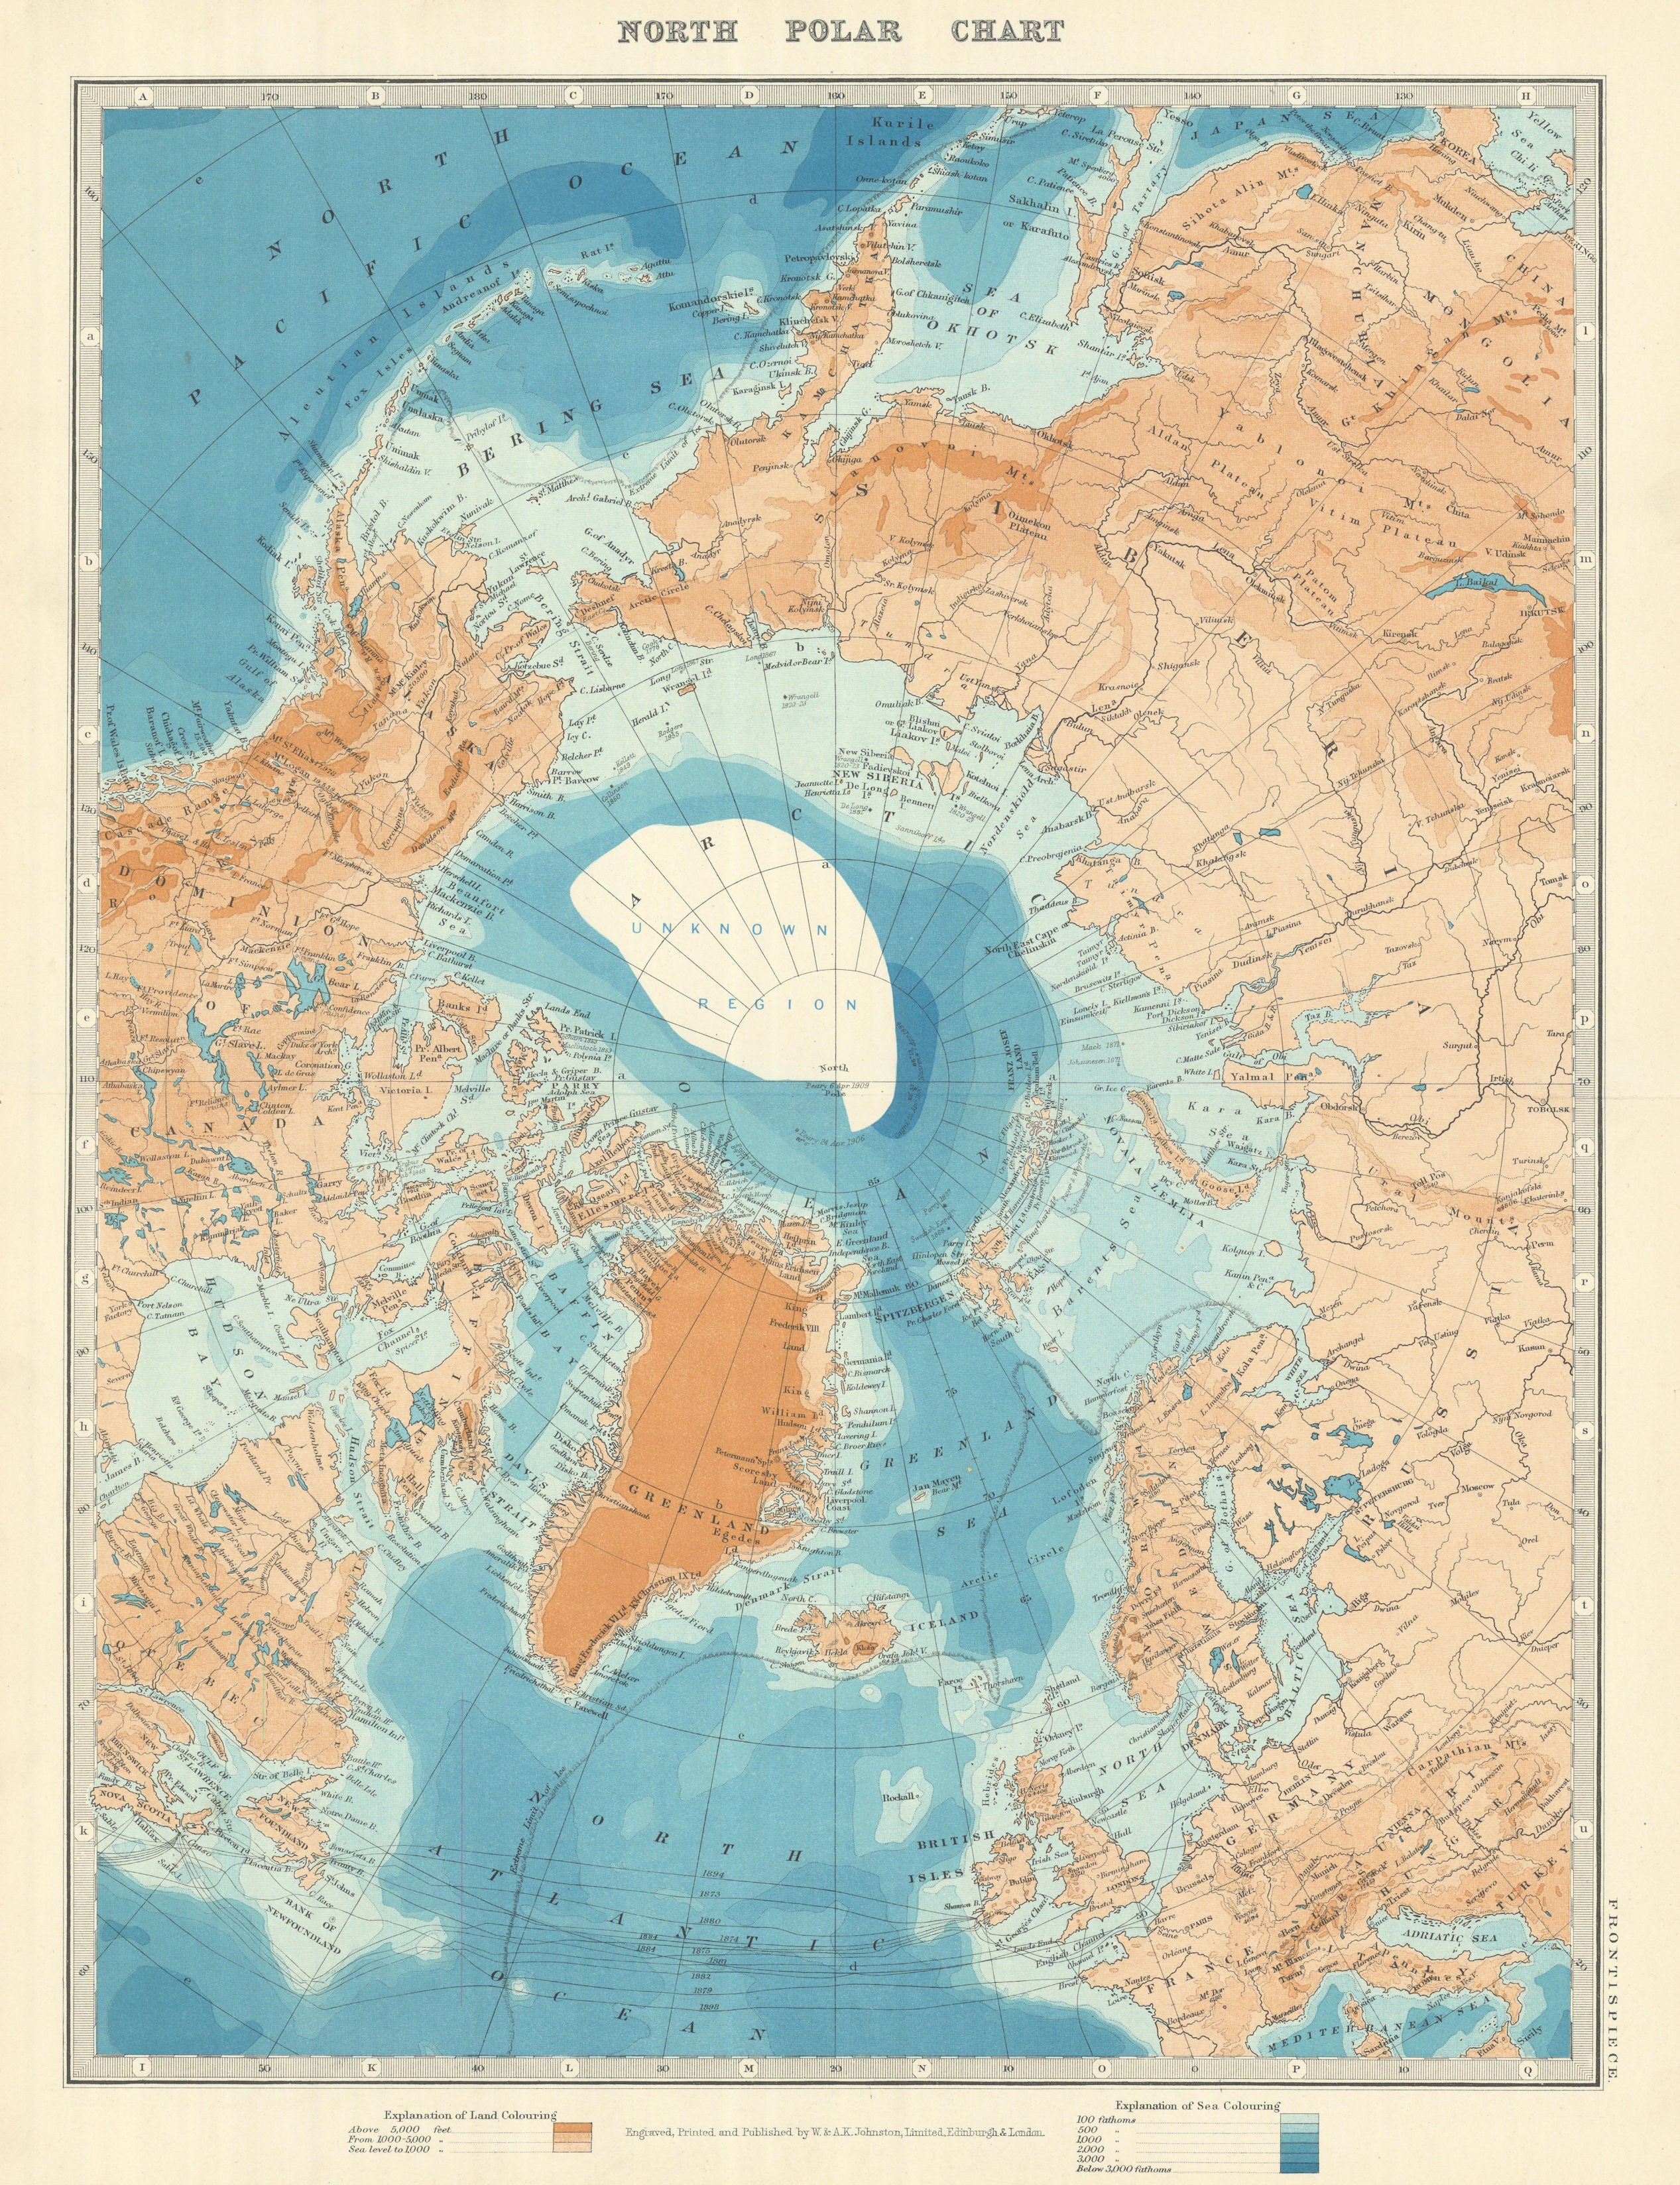 Associate Product ARCTIC. Show's Peary claim to have reached North Pole. JOHNSTON 1913 old map